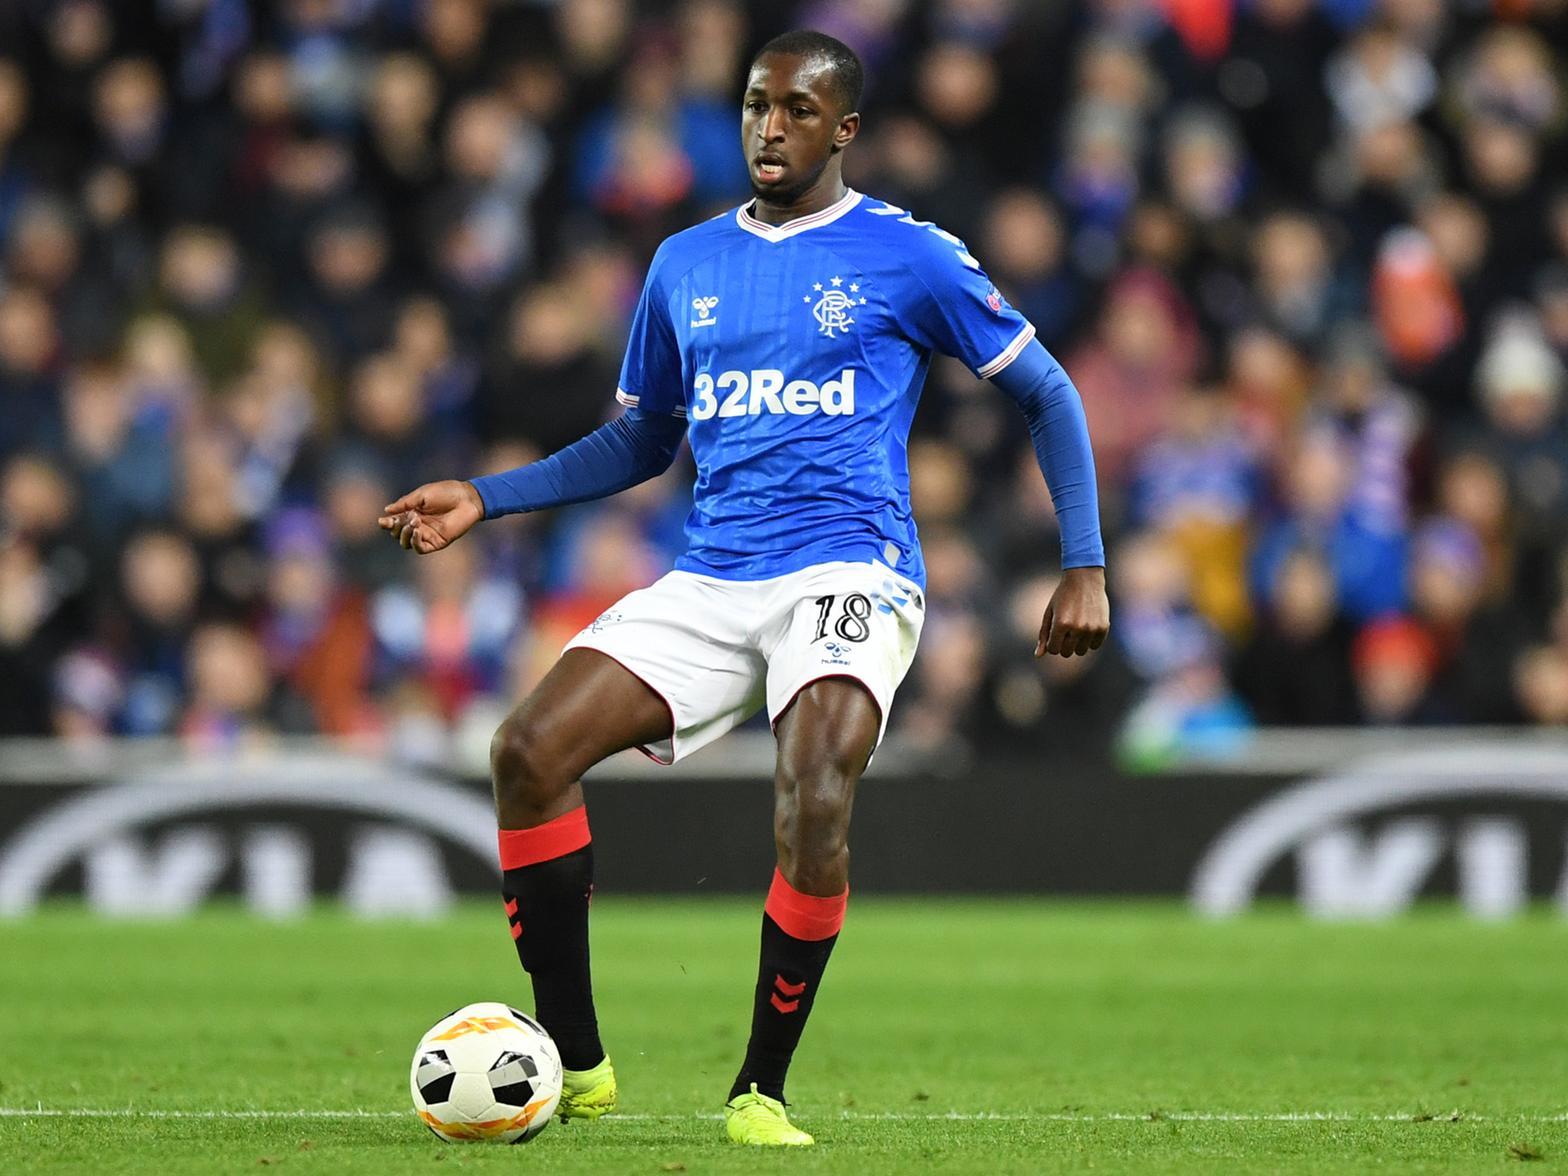 Leeds United have been tipped to sign former Arsenal starlet Glen Kamara. The Finland international currently plays for Rangers, who could demand around 8m for their star midfielder. (Express)